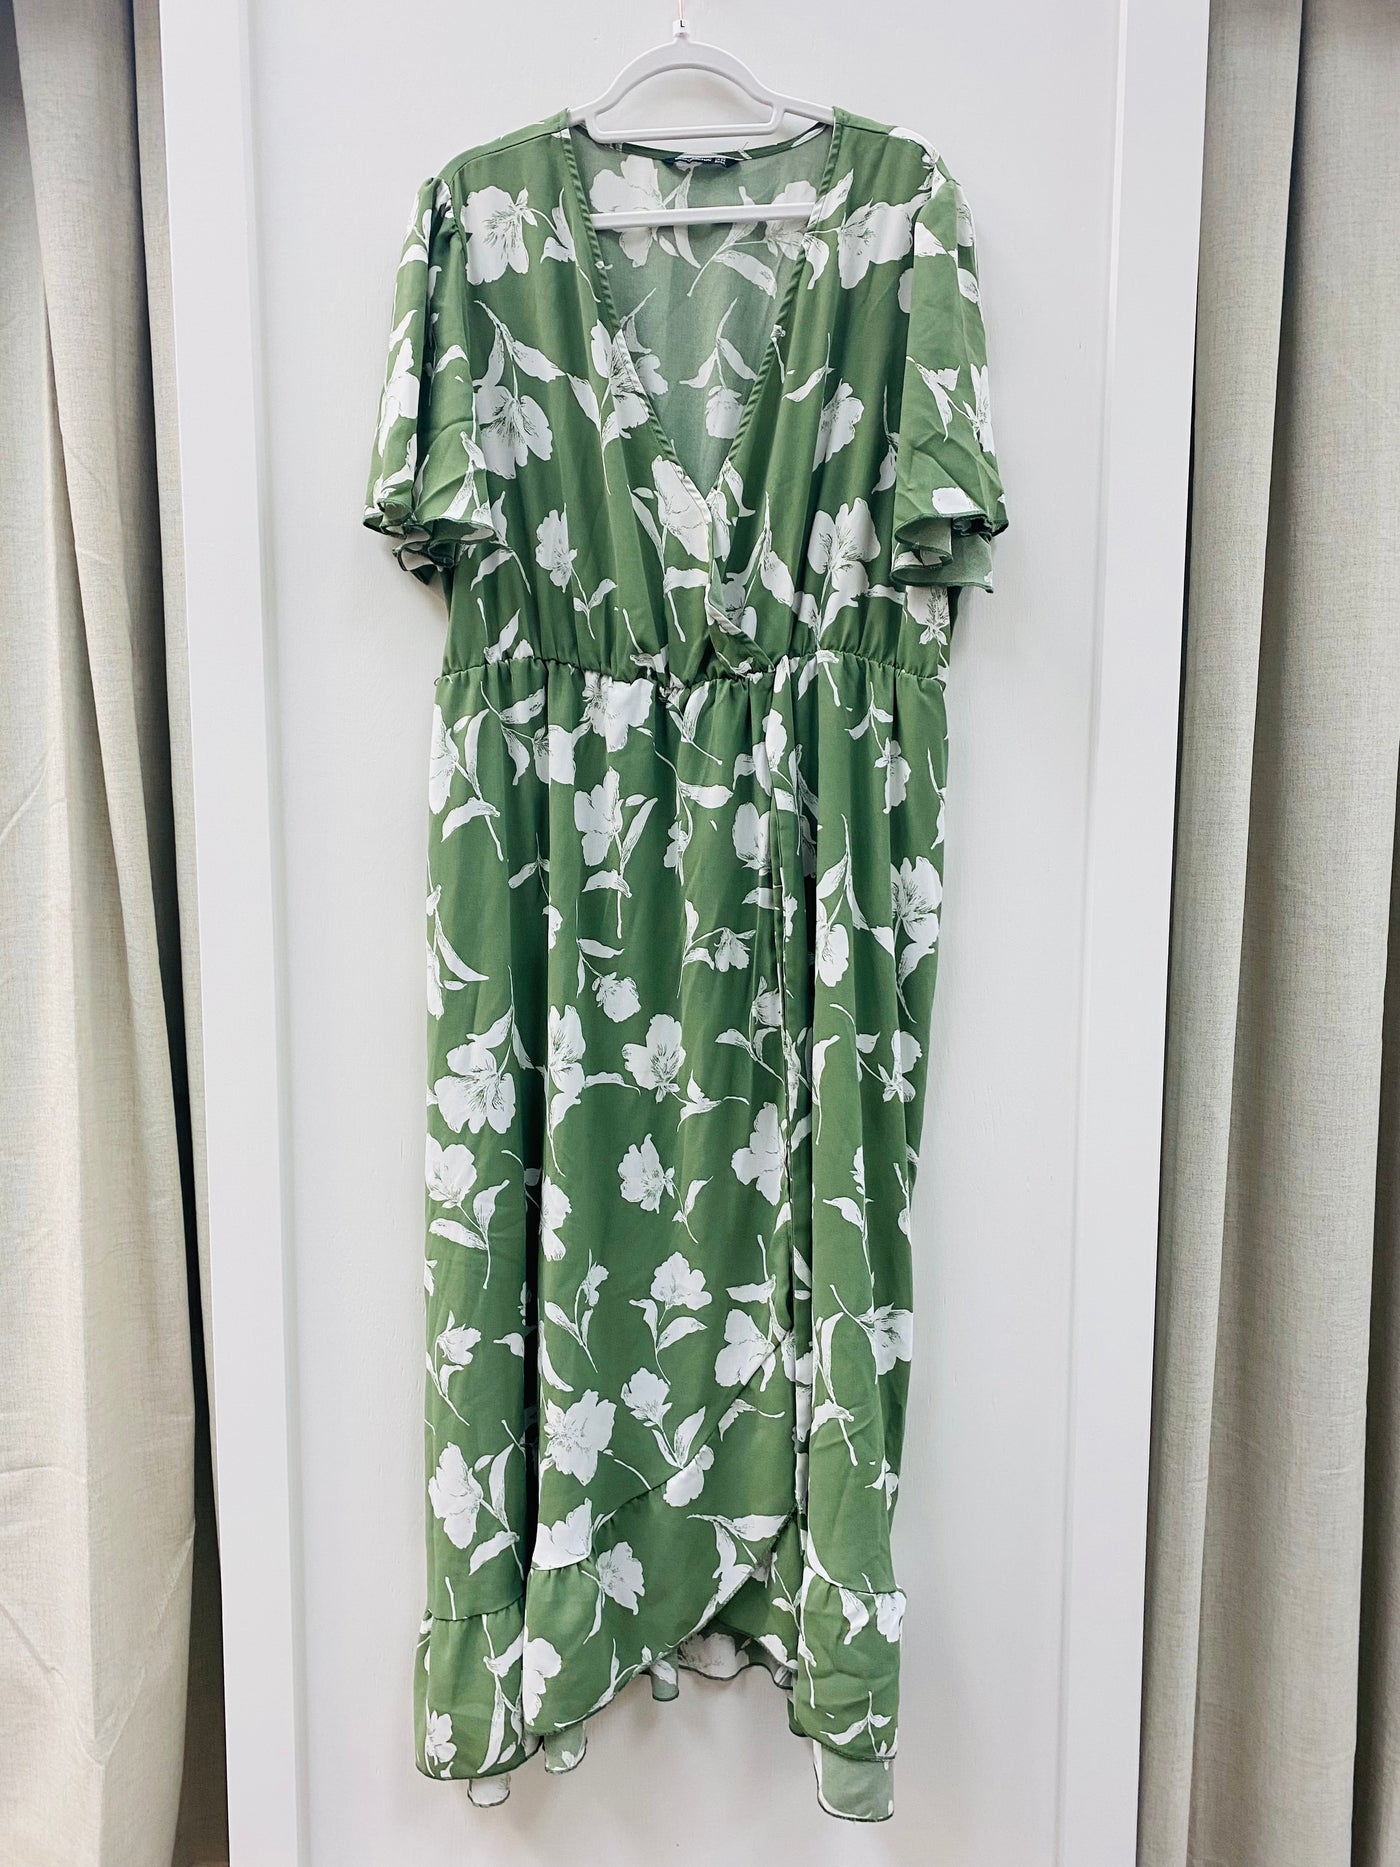 BLOOMCHIC green floral wrap dress